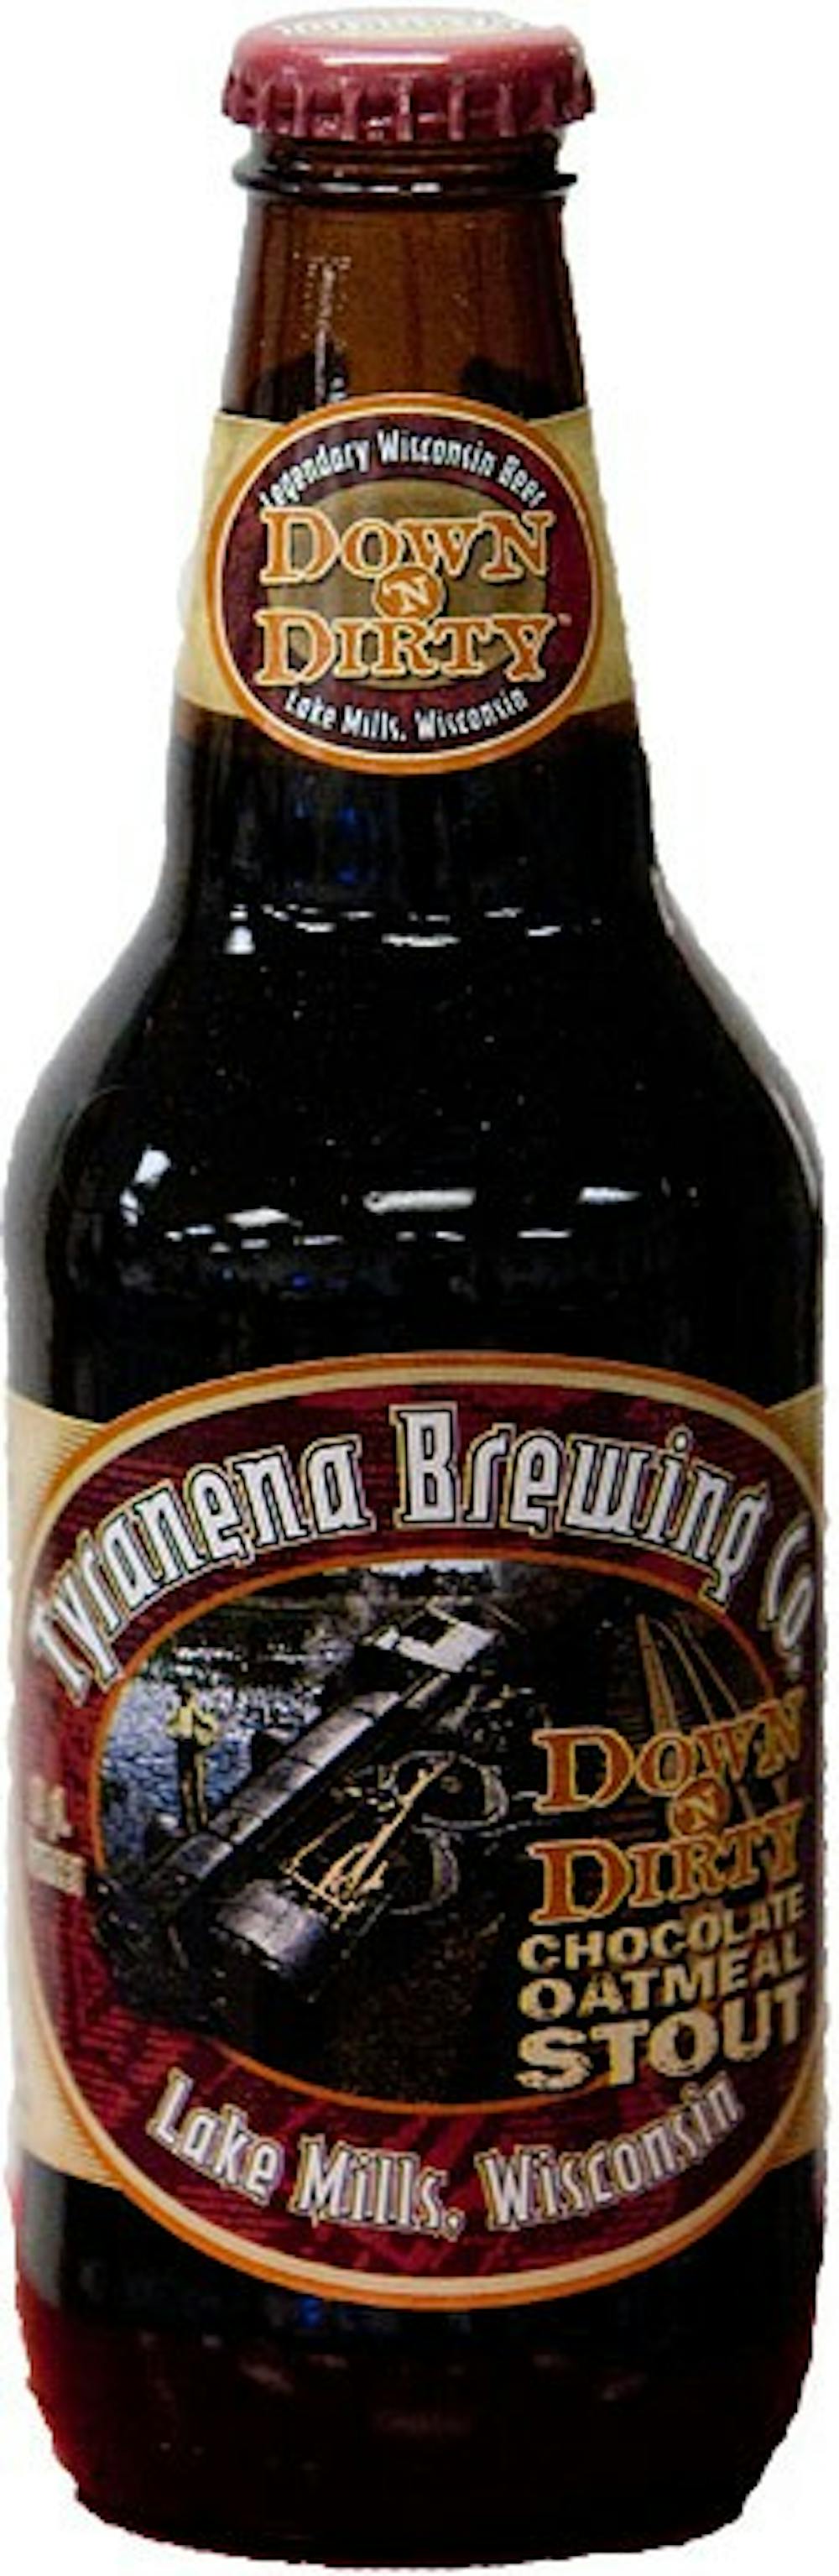 New Beer Thursday--Tyranena's Down 'n Dirty Chocolate Oatmeal Stout